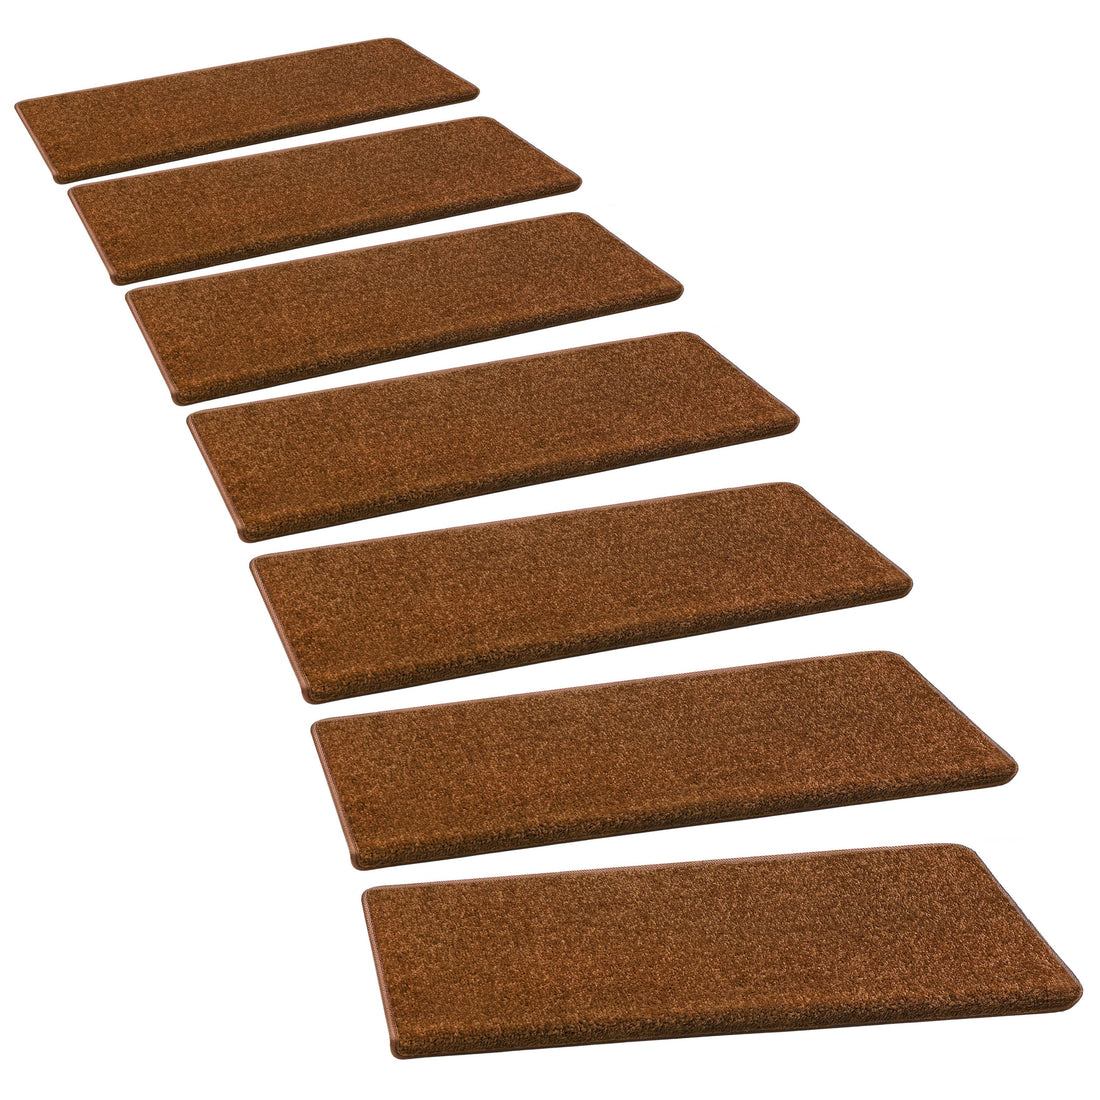 Non Slip Products, Anti Slip Products, Stair Treads